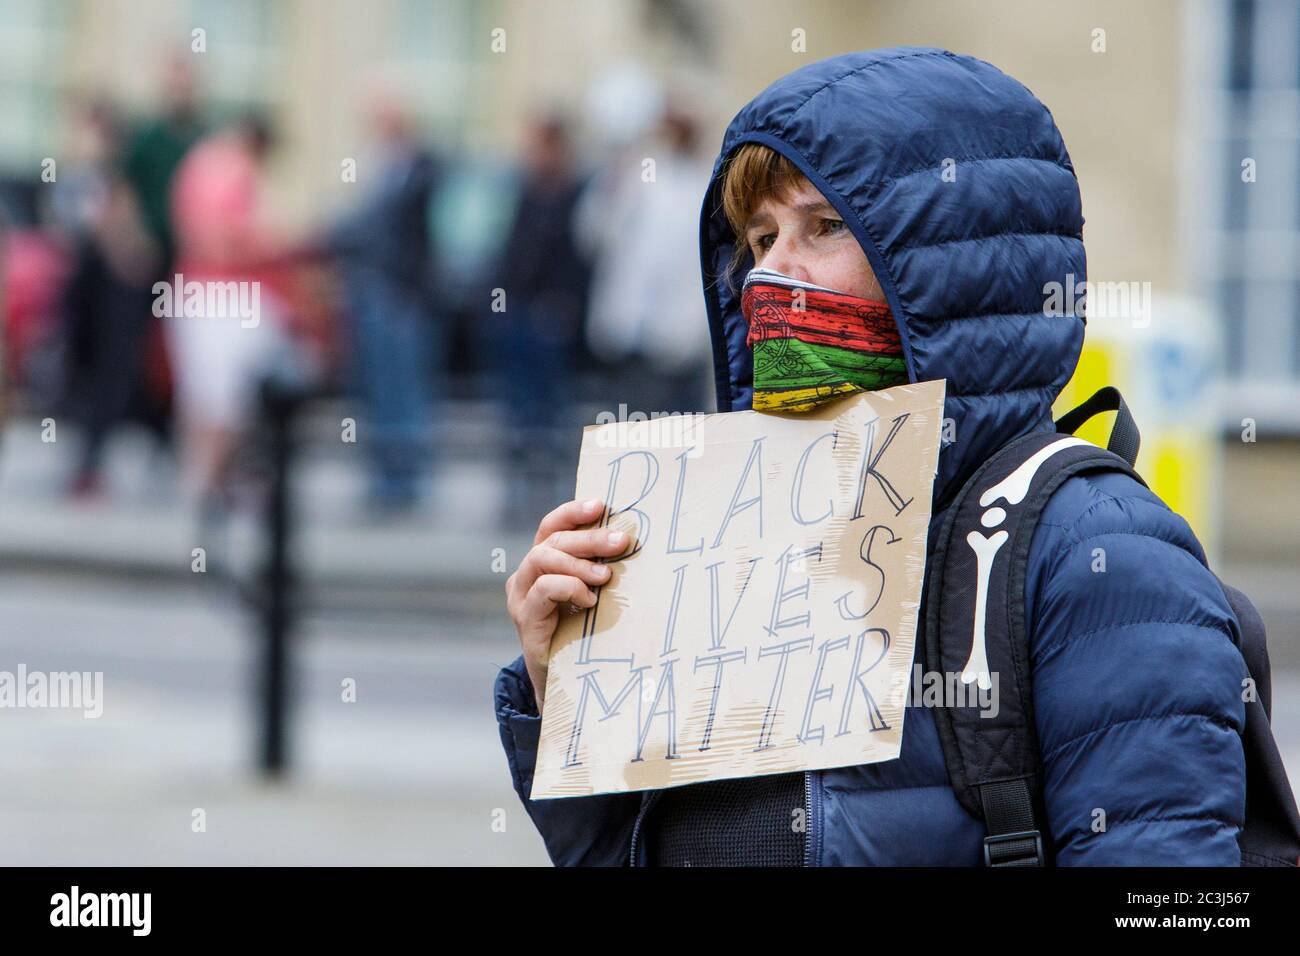 Chippenham, Wiltshire, UK. 20th June, 2020. A woman holds up a black lives matter sign during a black lives matter BLM protest in the town's Market Place. The rally was organised in order for local people to draw attention to racism in the UK and to show solidarity with other BLM protests that have been taking place around the world after the death of George Floyd who died in police custody on 25th May in Minneapolis. Credit: Lynchpics/Alamy Live News Stock Photo